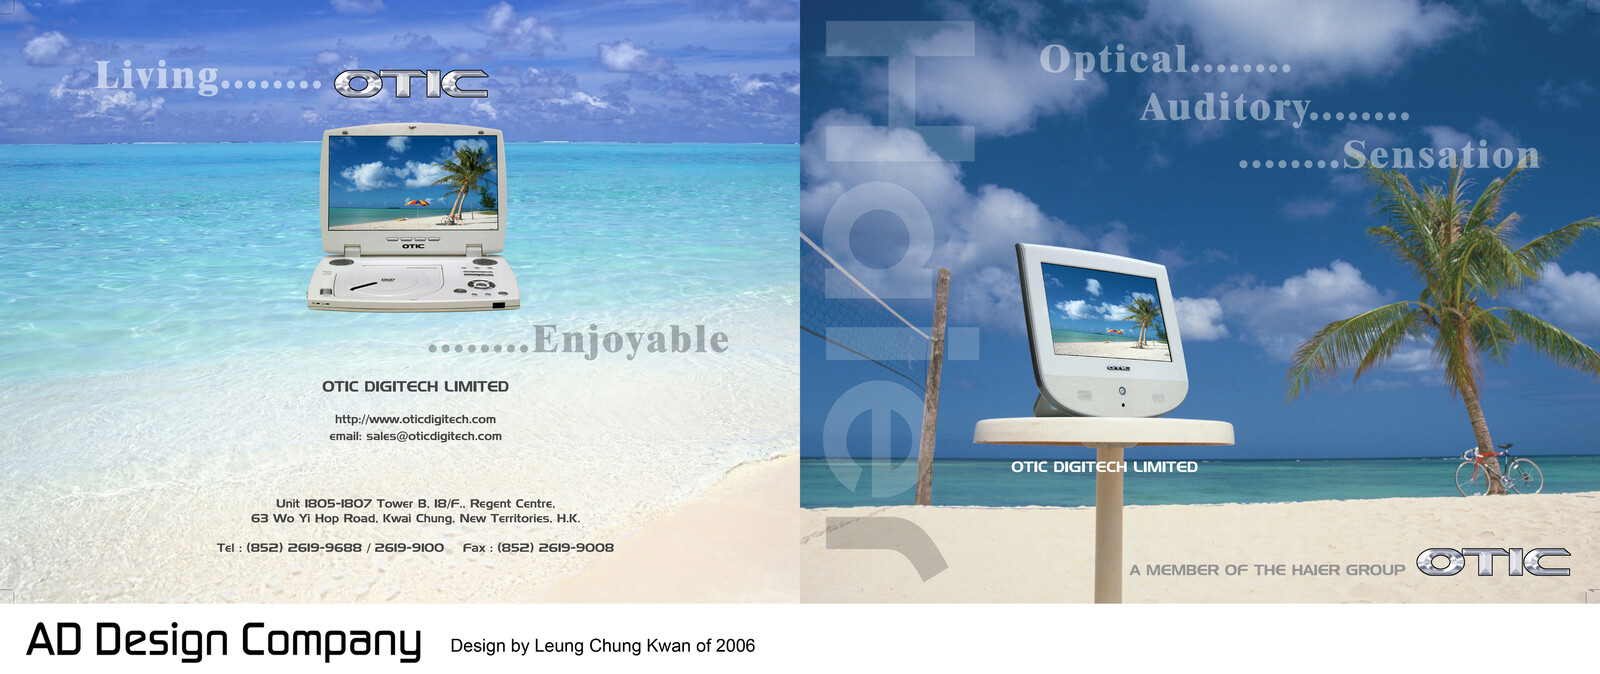 💎 Booklet Catalogue Cover | Design by Leung Chung Kwan on 2006 💎
Brand Name︰Haier / OTIC | Client︰OTIC Limited